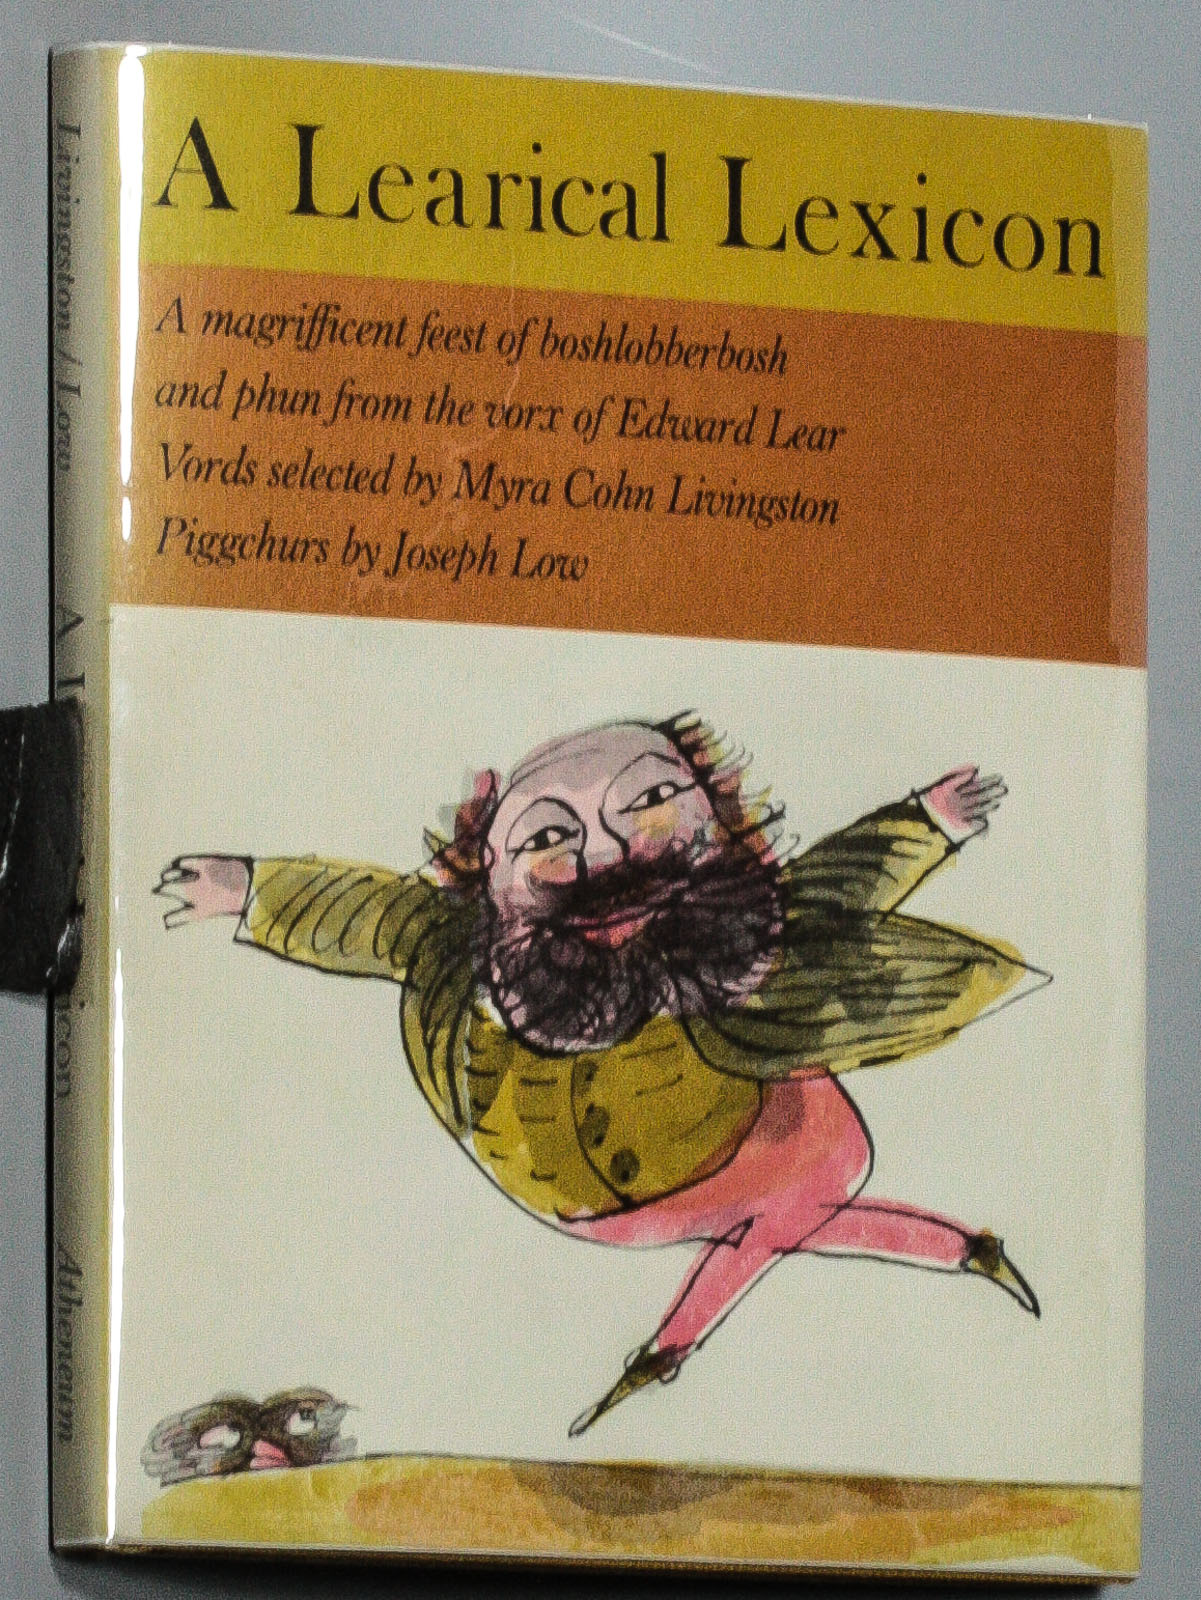 Image for A LEARICAL LEXICON: FROM THE WORKS OF EDWARD LEAR [LIMITED EDITION SIGNED TWICE]